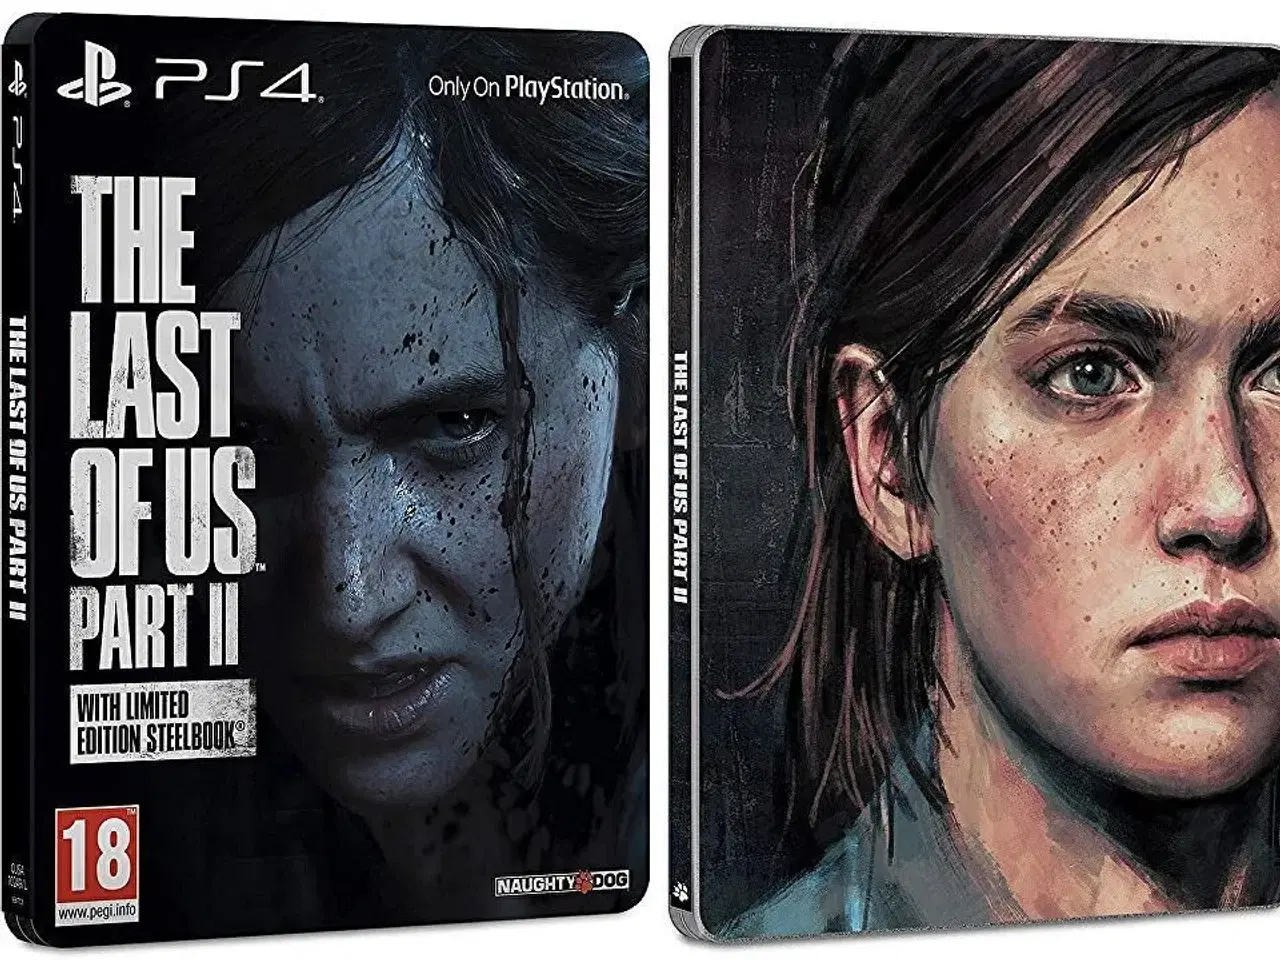 Billede 5 - The Last of Us Part 2 Limited Edition Steelbook 